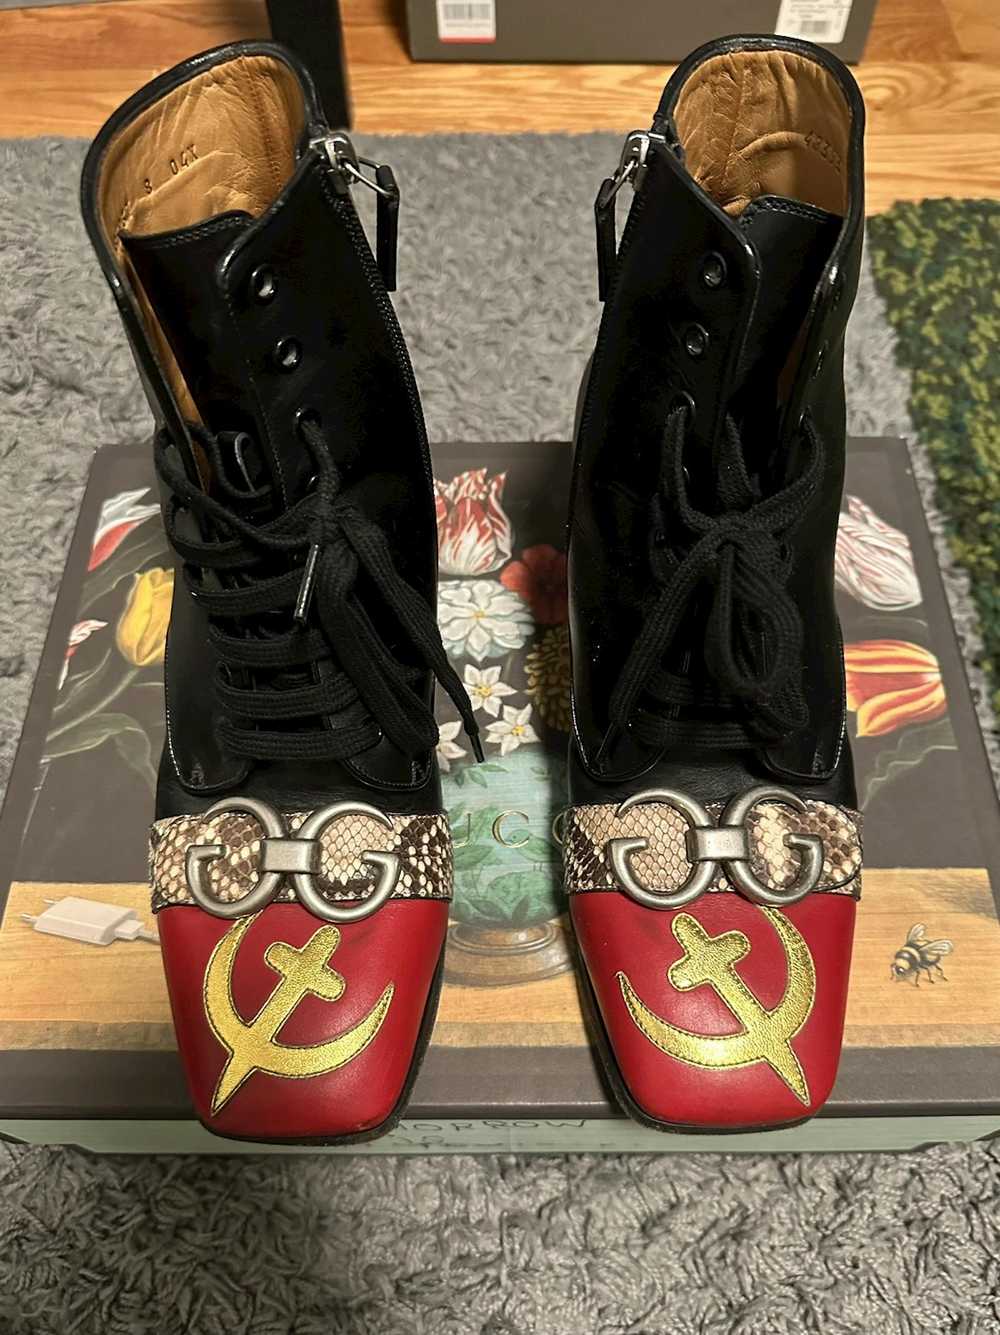 Gucci Gucci 17AW Communism Boots - image 1